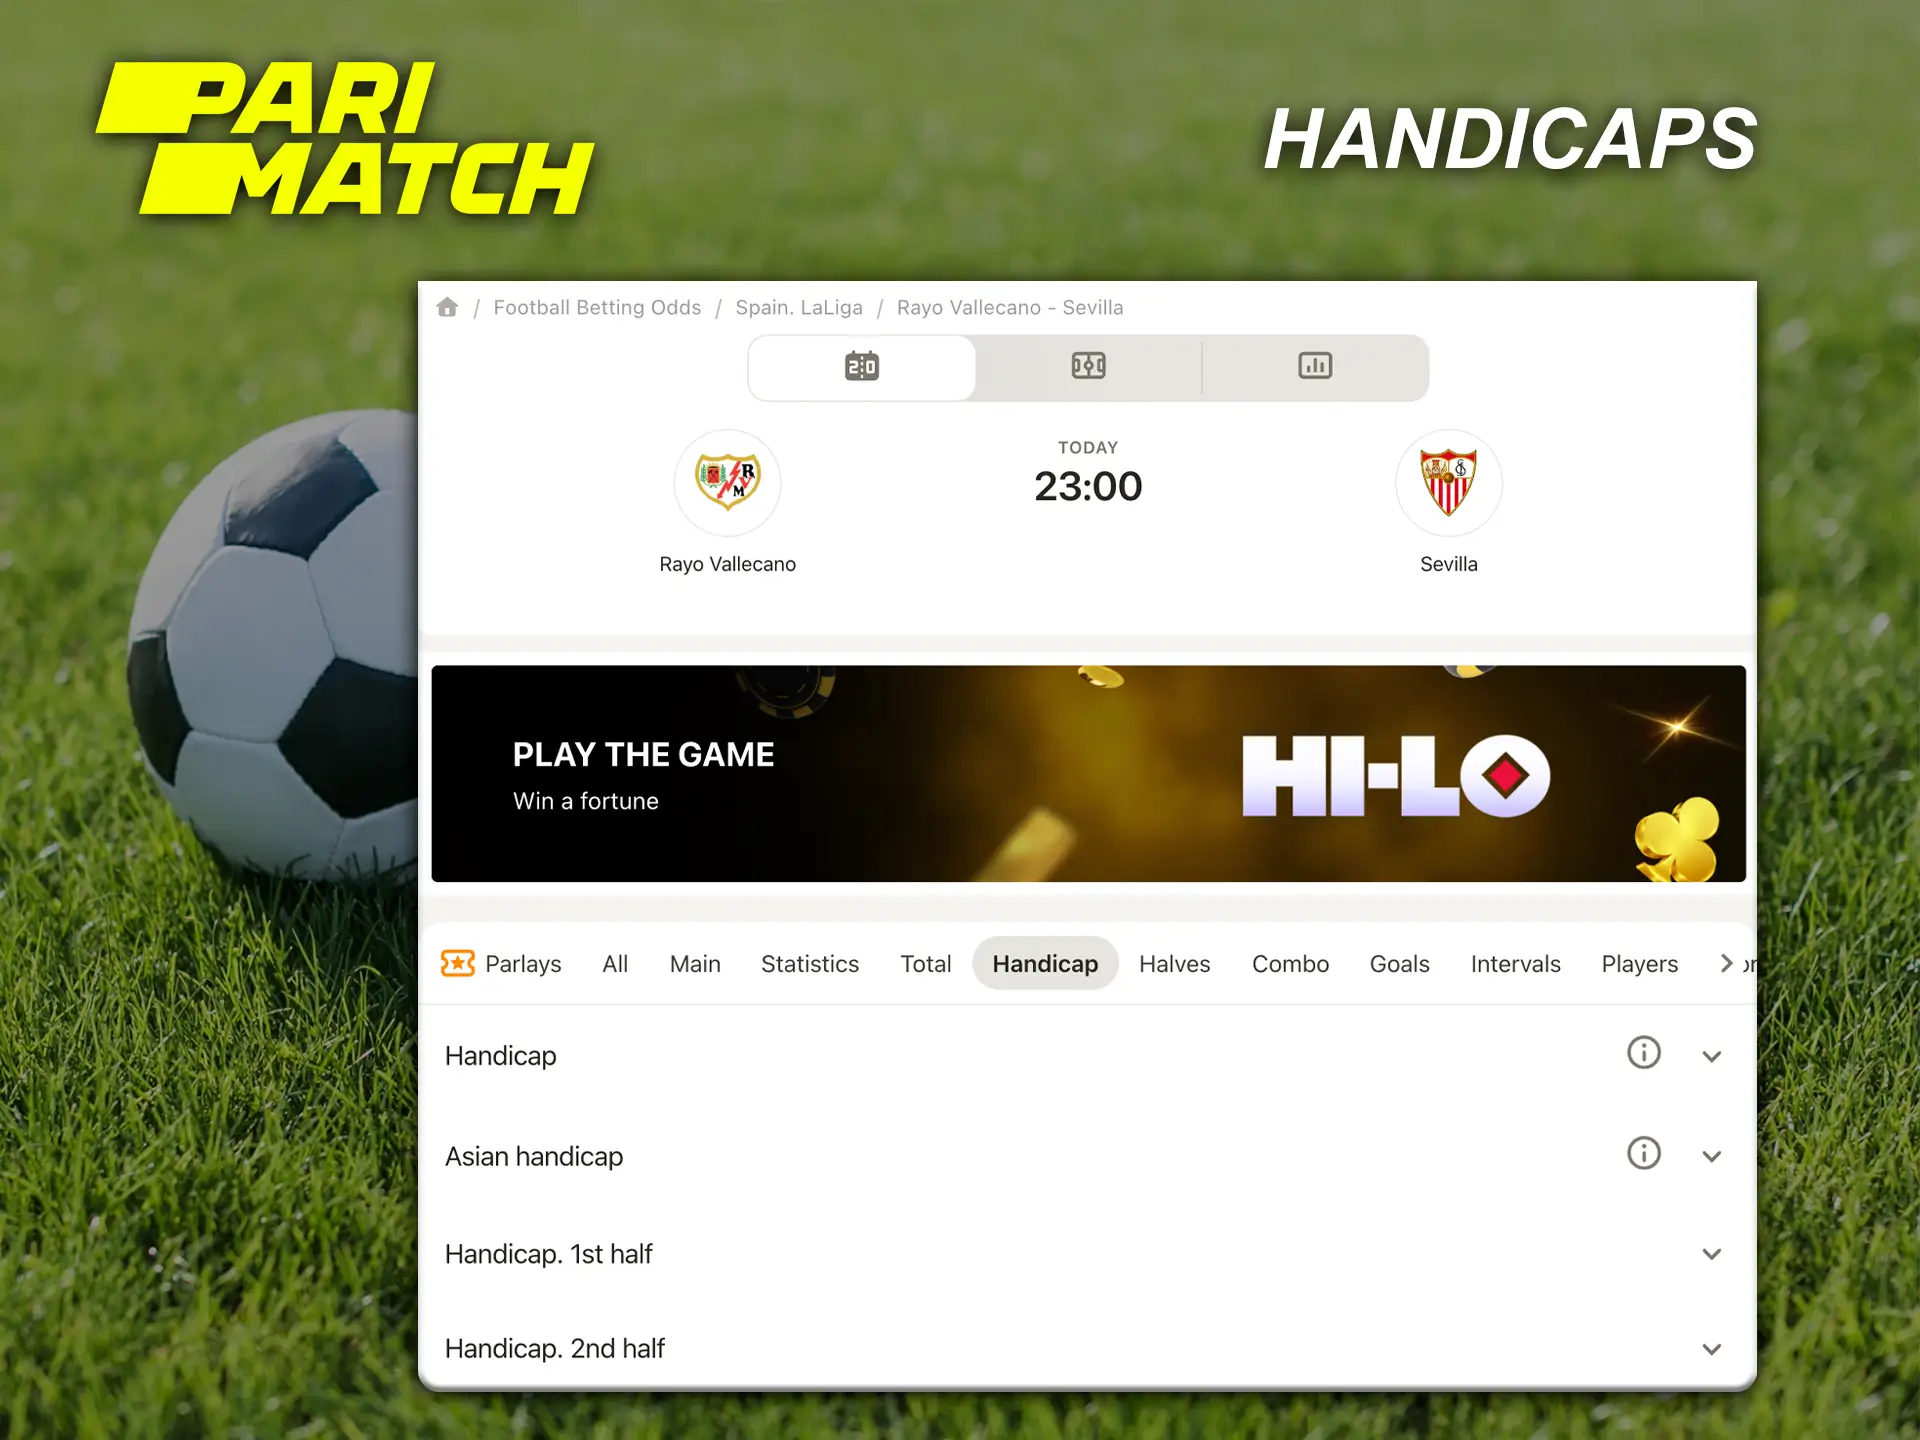 Bet on the clear underdog of the match with a handicap and pick up the best odds at Parimatch.